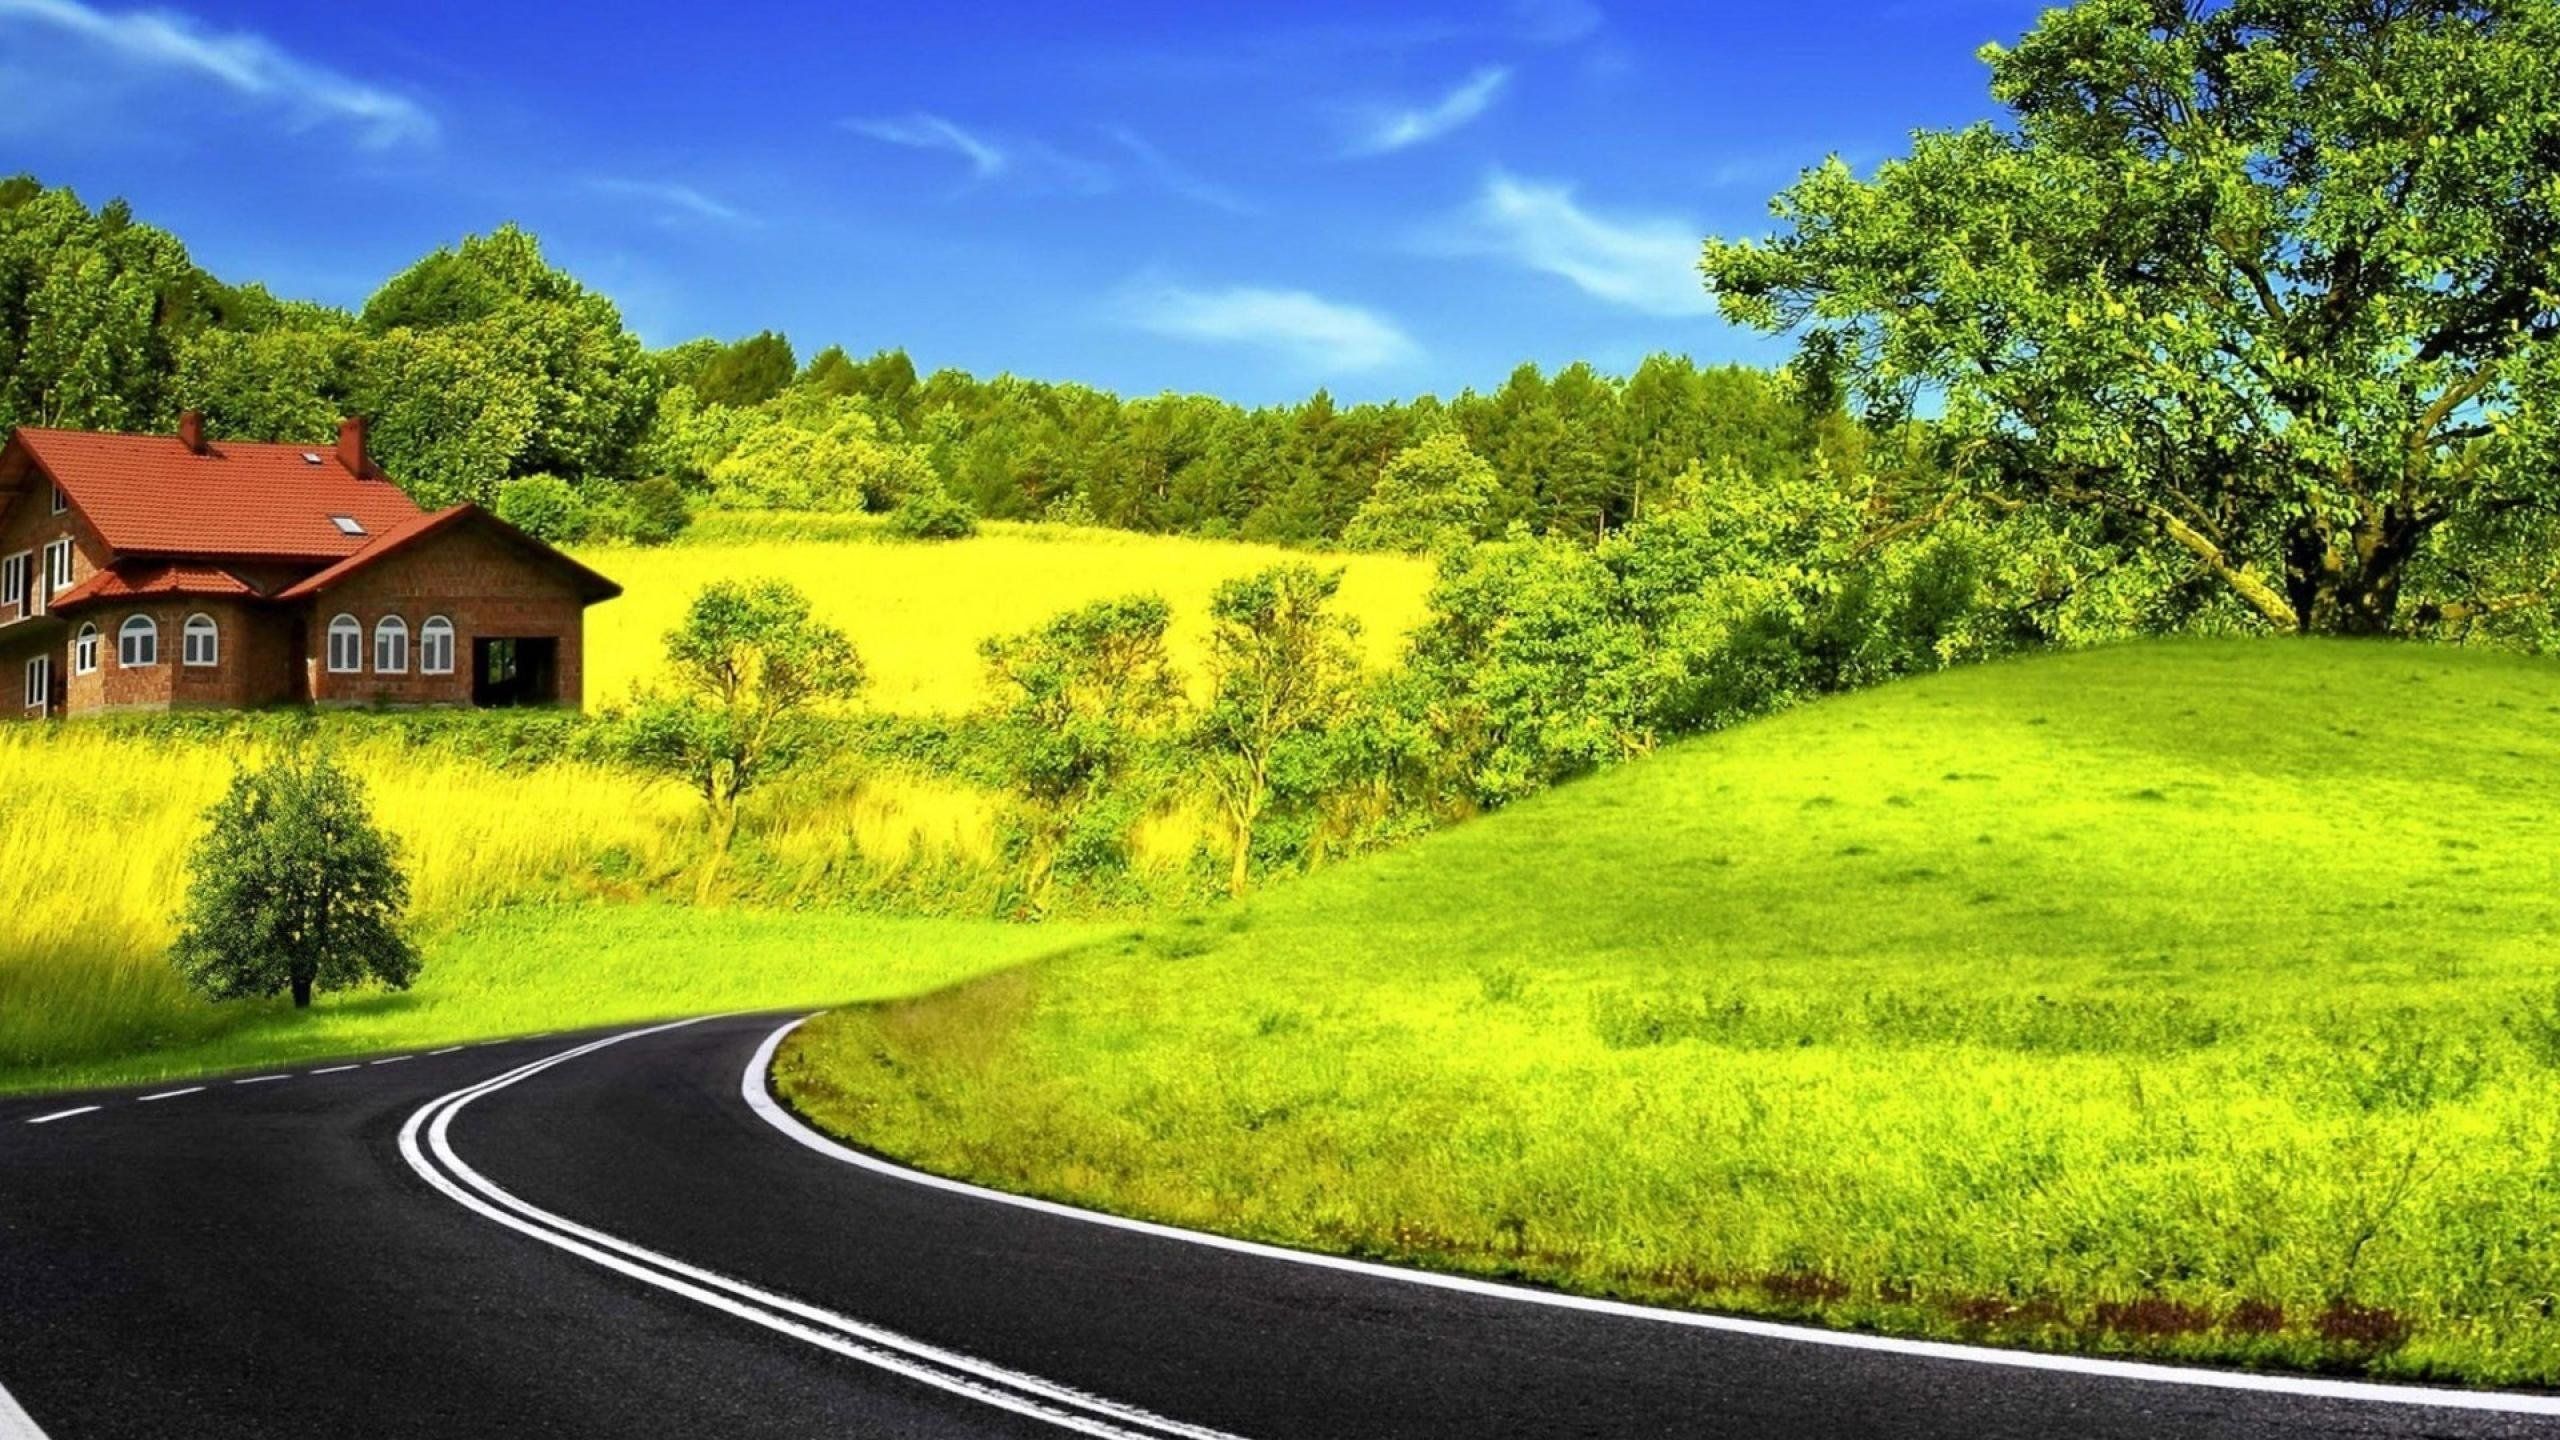 Roadside 4K wallpaper for your desktop or mobile screen free and easy to download